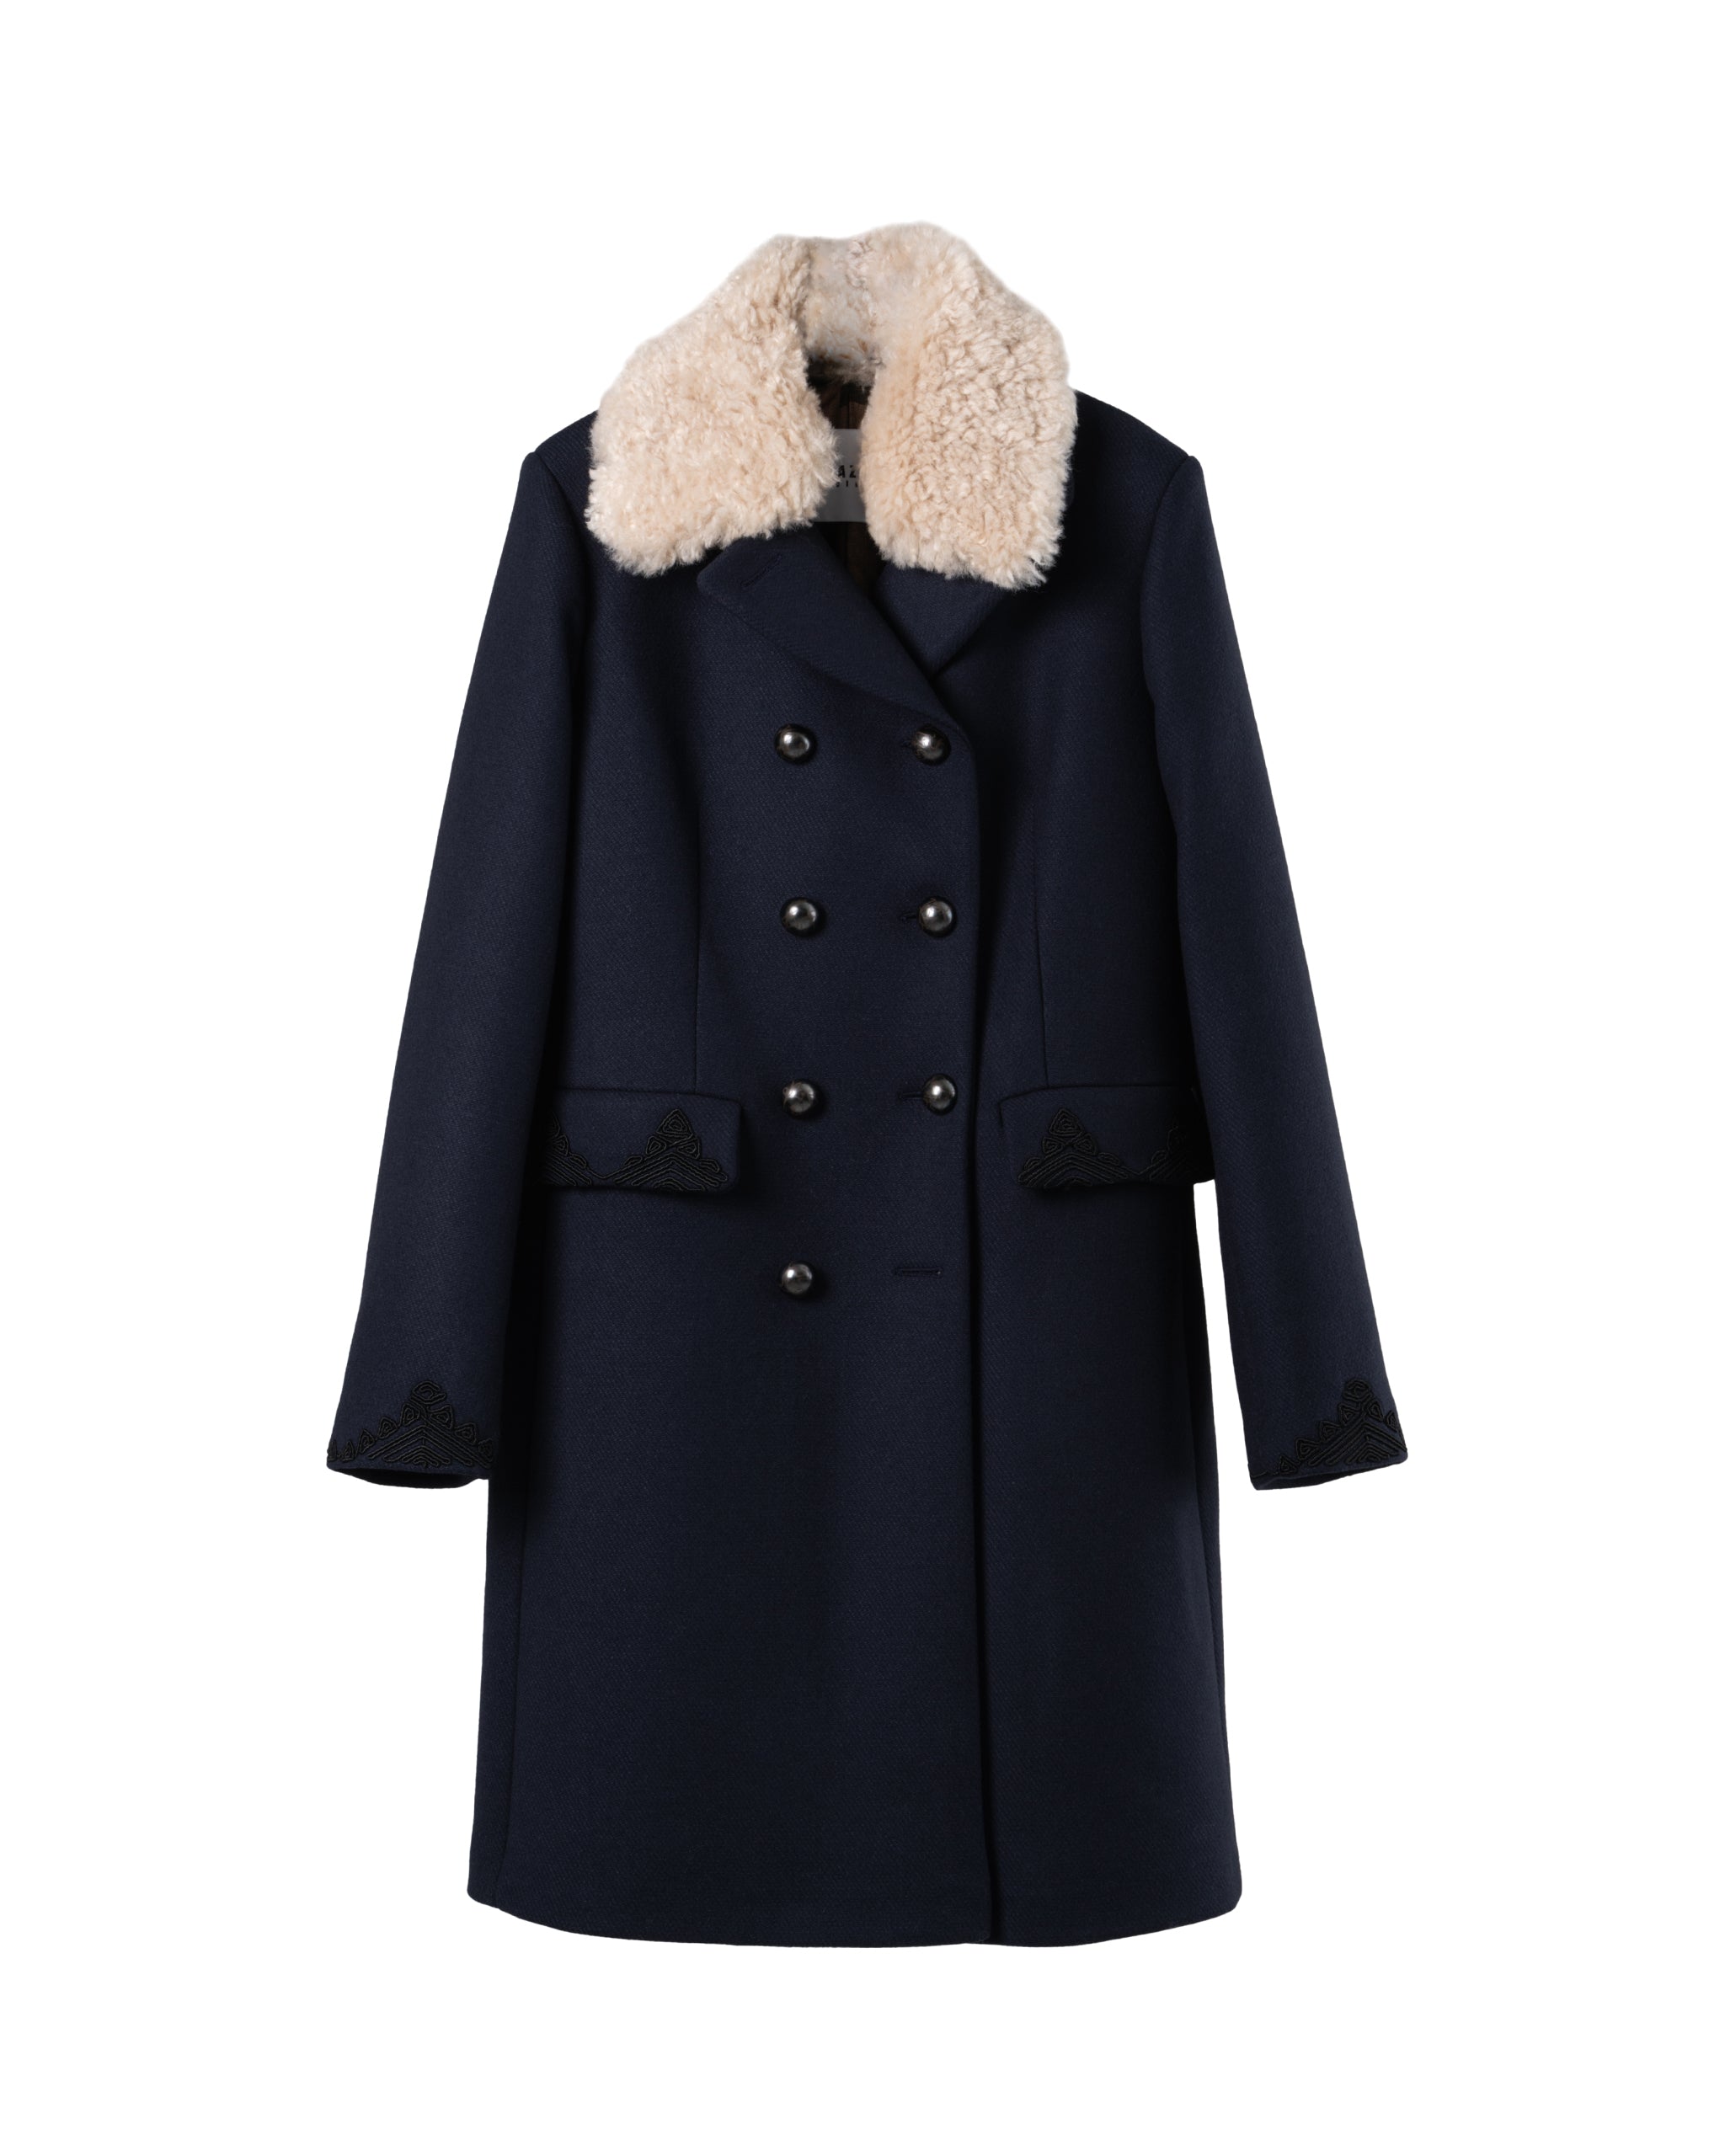 DOUBLE BREASTED WOOL FAKE FUR TRIM JACKET